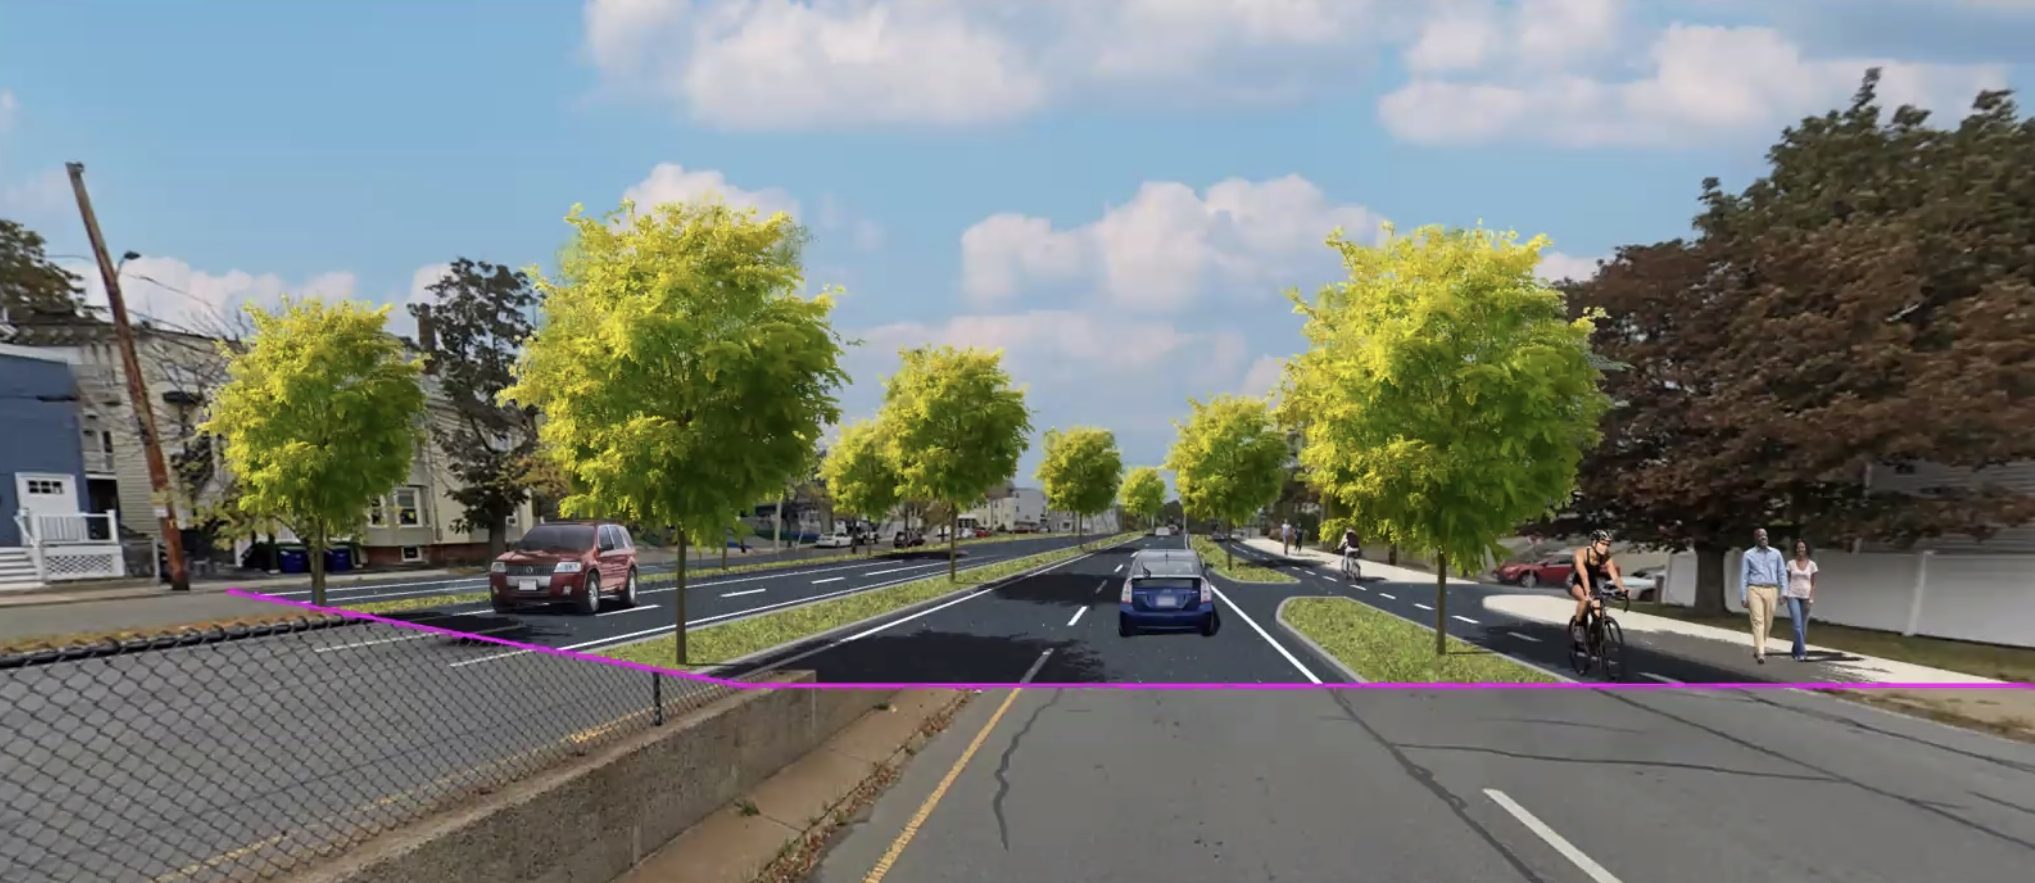 A rendering of a proposed McGrath Boulevard overlaid on an existing view of the six-lane highway near Otis Street. A pink line running horizontally through the photo separates the rendering from the existing view and shows how the roadway would be narrowed to four lanes, with the existing concrete median strip removed and replaced by a planted, tree-lined median instead. On the right side, a two-way bike path runs next to a sidewalk and another wide planted buffer strip next to the roadway.